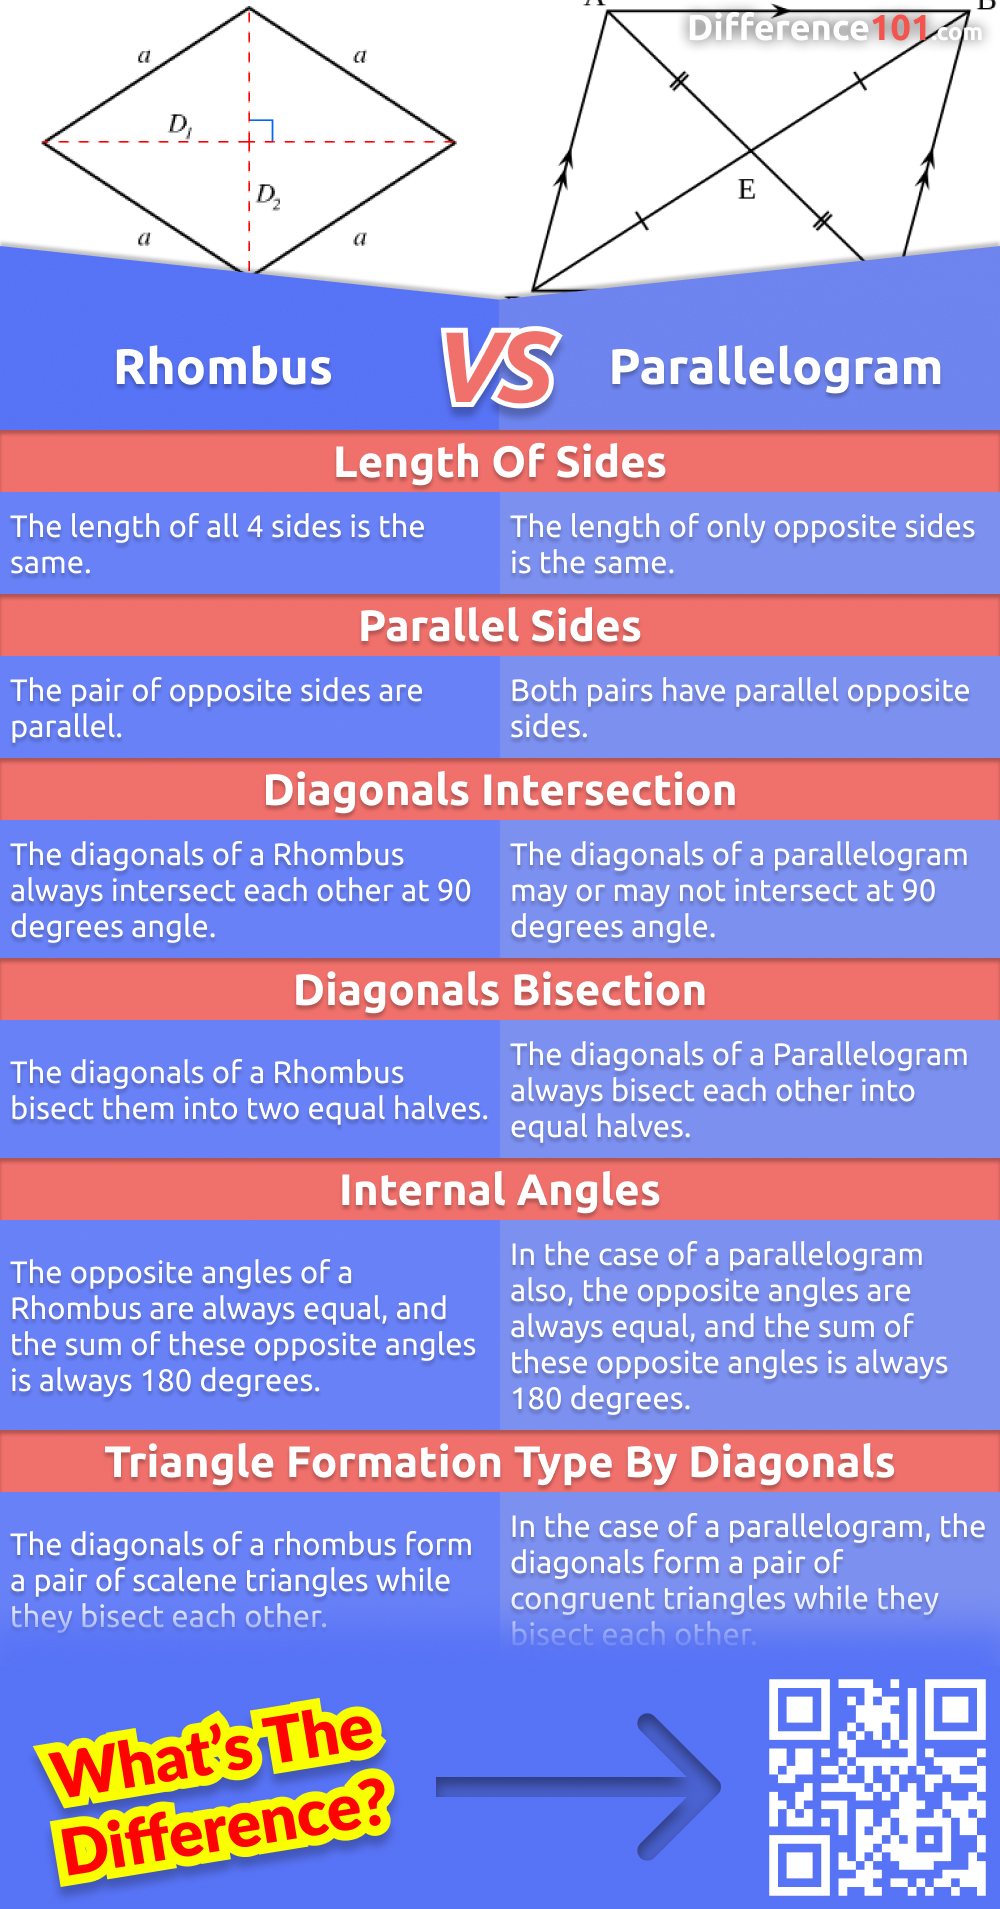 What's the difference between a rhombus and a parallelogram? Both shapes have four sides, but that's about where the similarities end. Here we compare the two shapes, looking at the pros and cons of each.